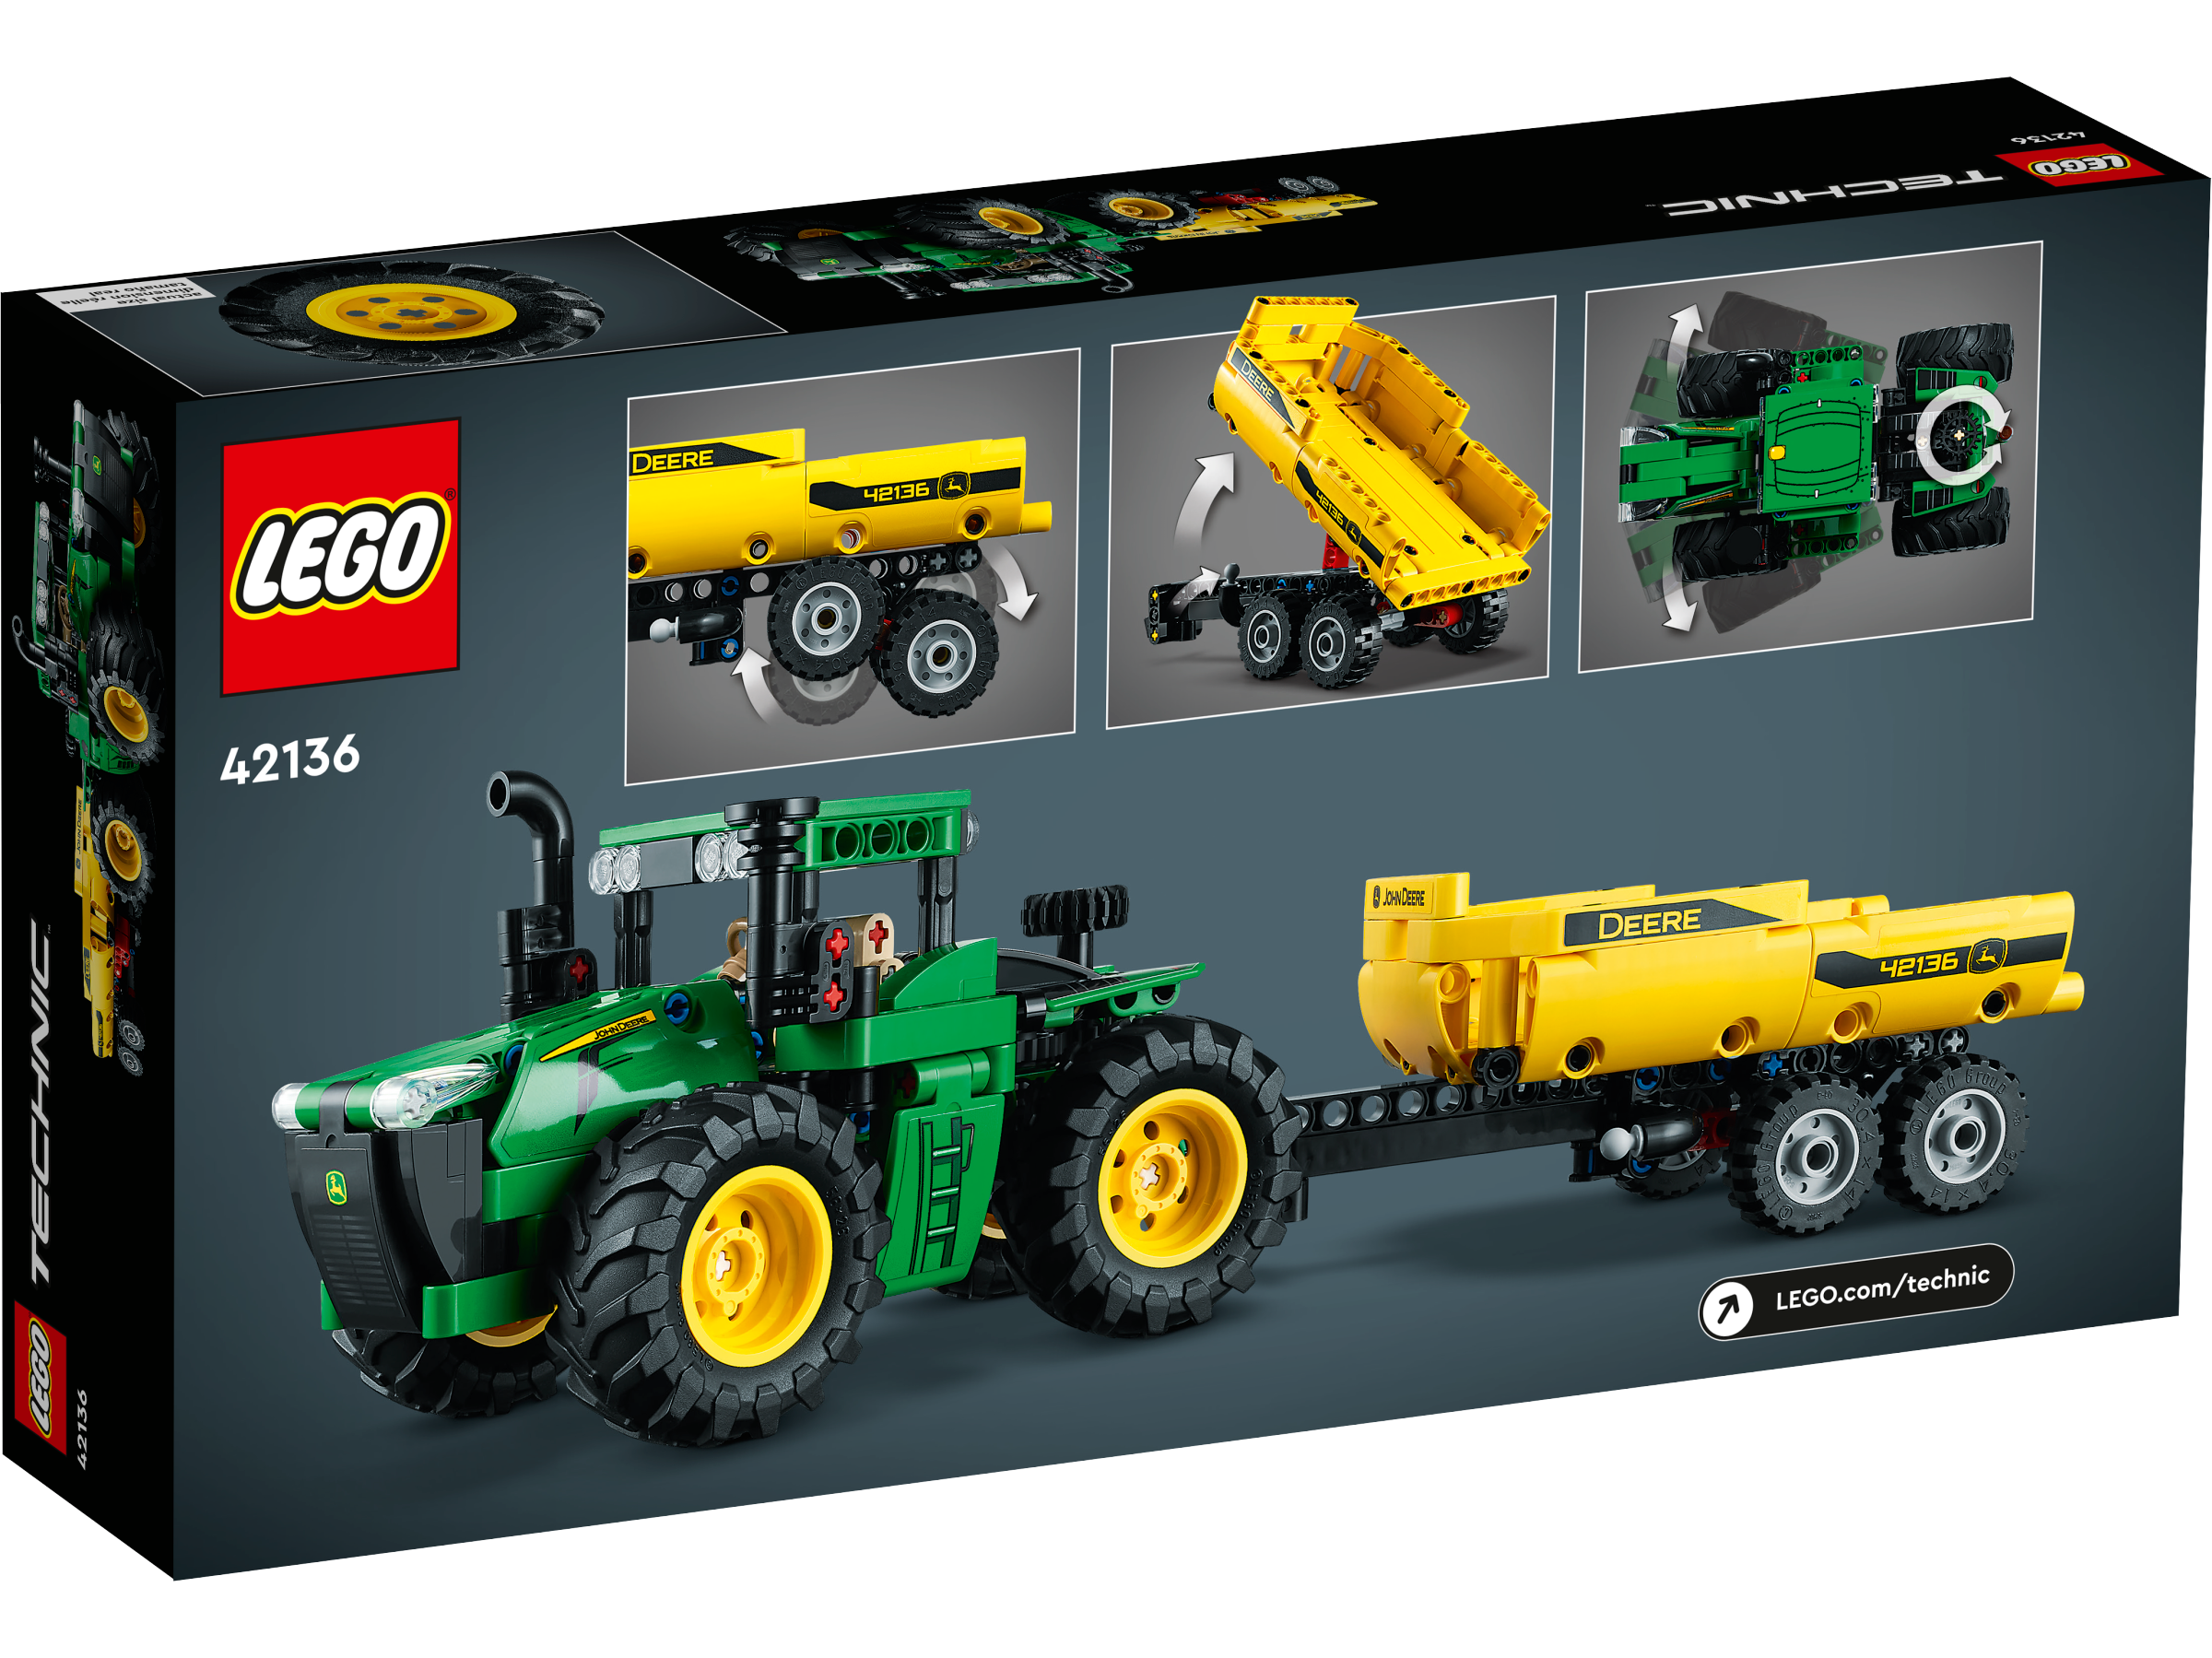 John Deere 9620R | US online Buy Shop Technic™ at 42136 | 4WD LEGO® the Official Tractor